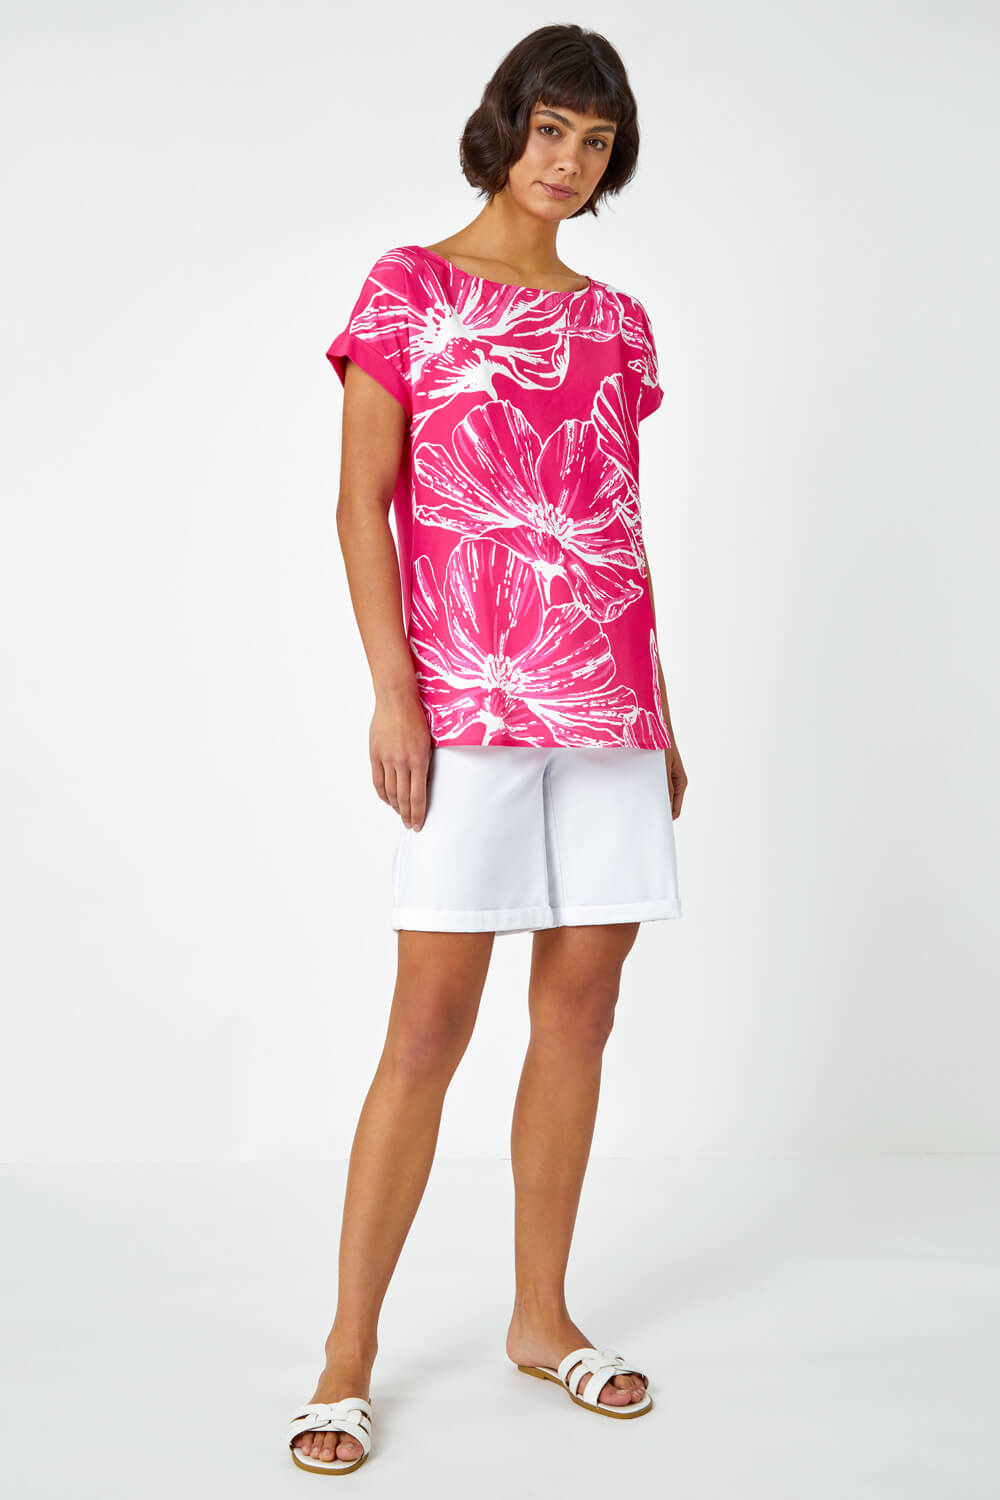 PINK Linear Floral Print Stretch T-Shirt, Image 4 of 5